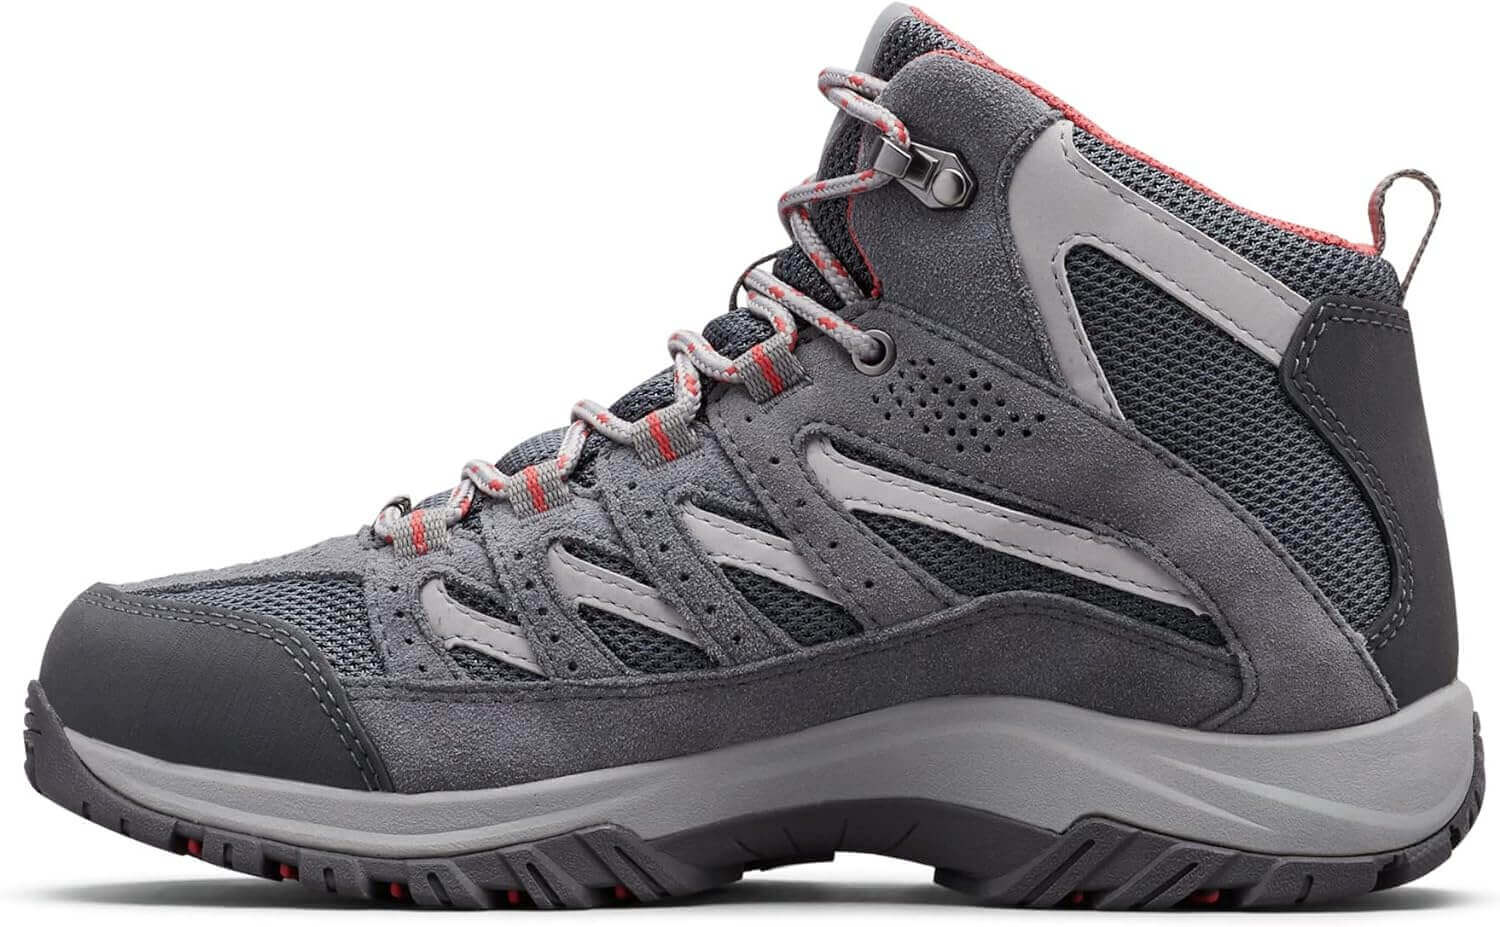 Shop The Latest >Columbia Women's Crestwood Mid Waterproof Hiking Boot > *Only $94.04*> From The Top Brand > *Columbial* > Shop Now and Get Free Shipping On Orders Over $45.00 >*Shop Earth Foot*